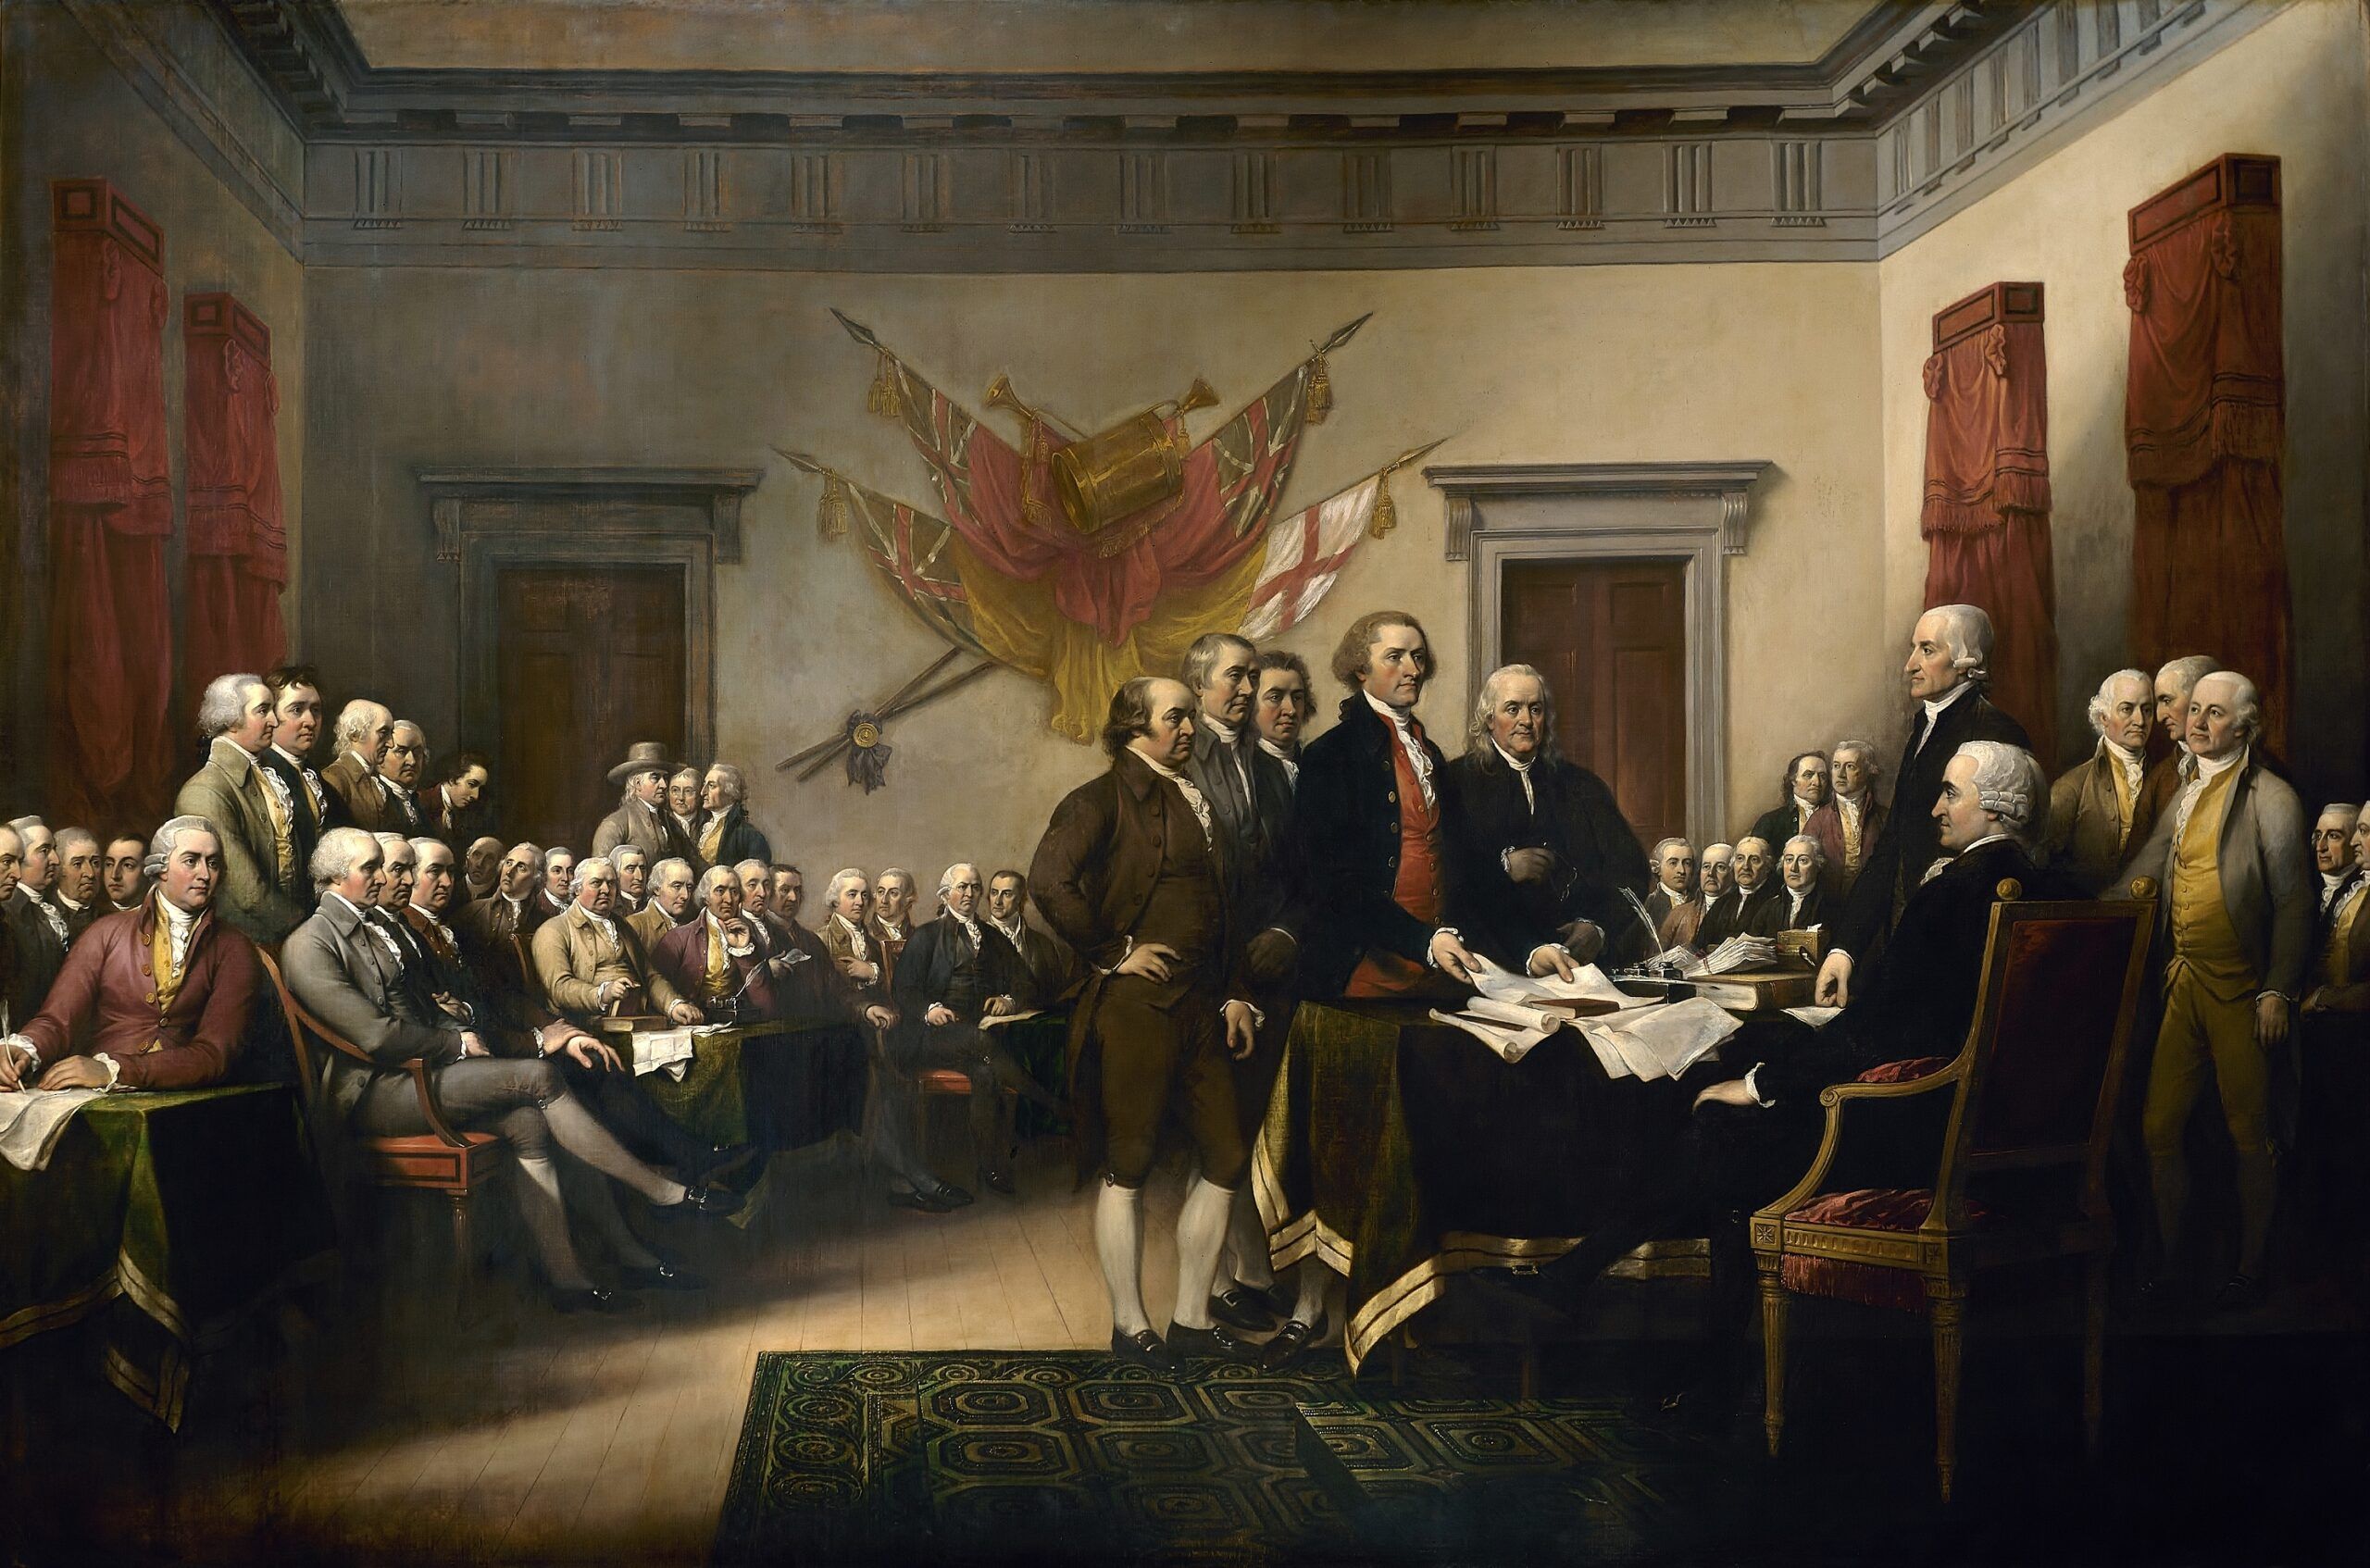 America's first Continental Congress drafting the Declaration of Independence